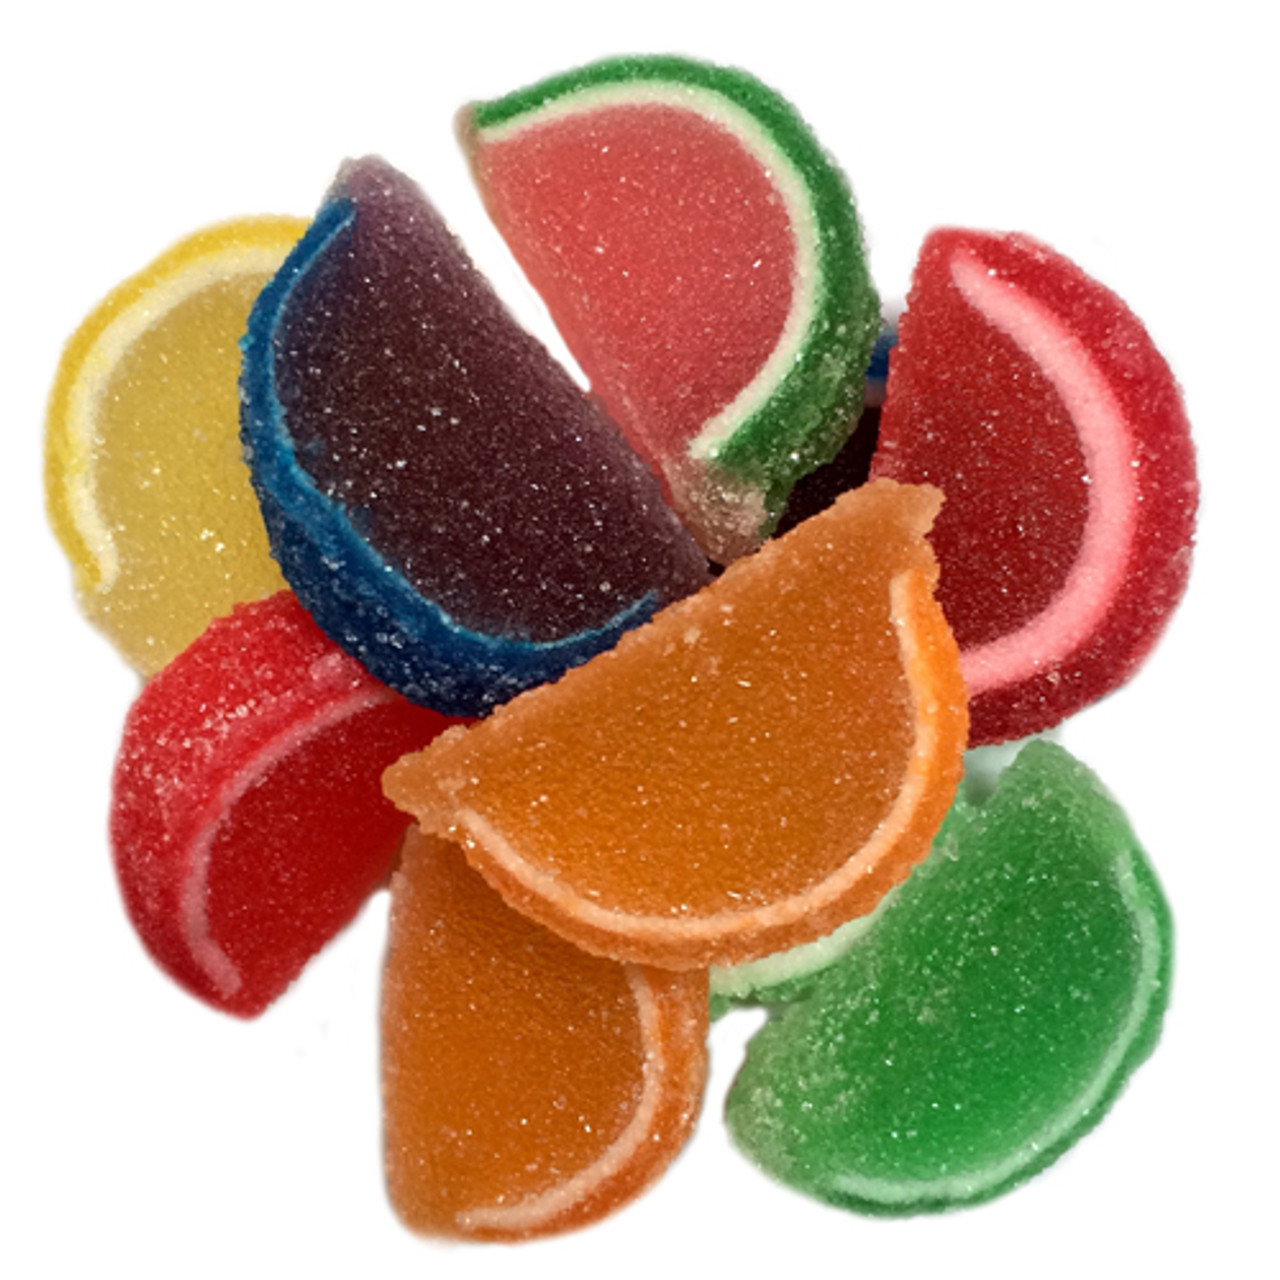 Honey Candy, Assorted Fruit Flavors, 2 lb.